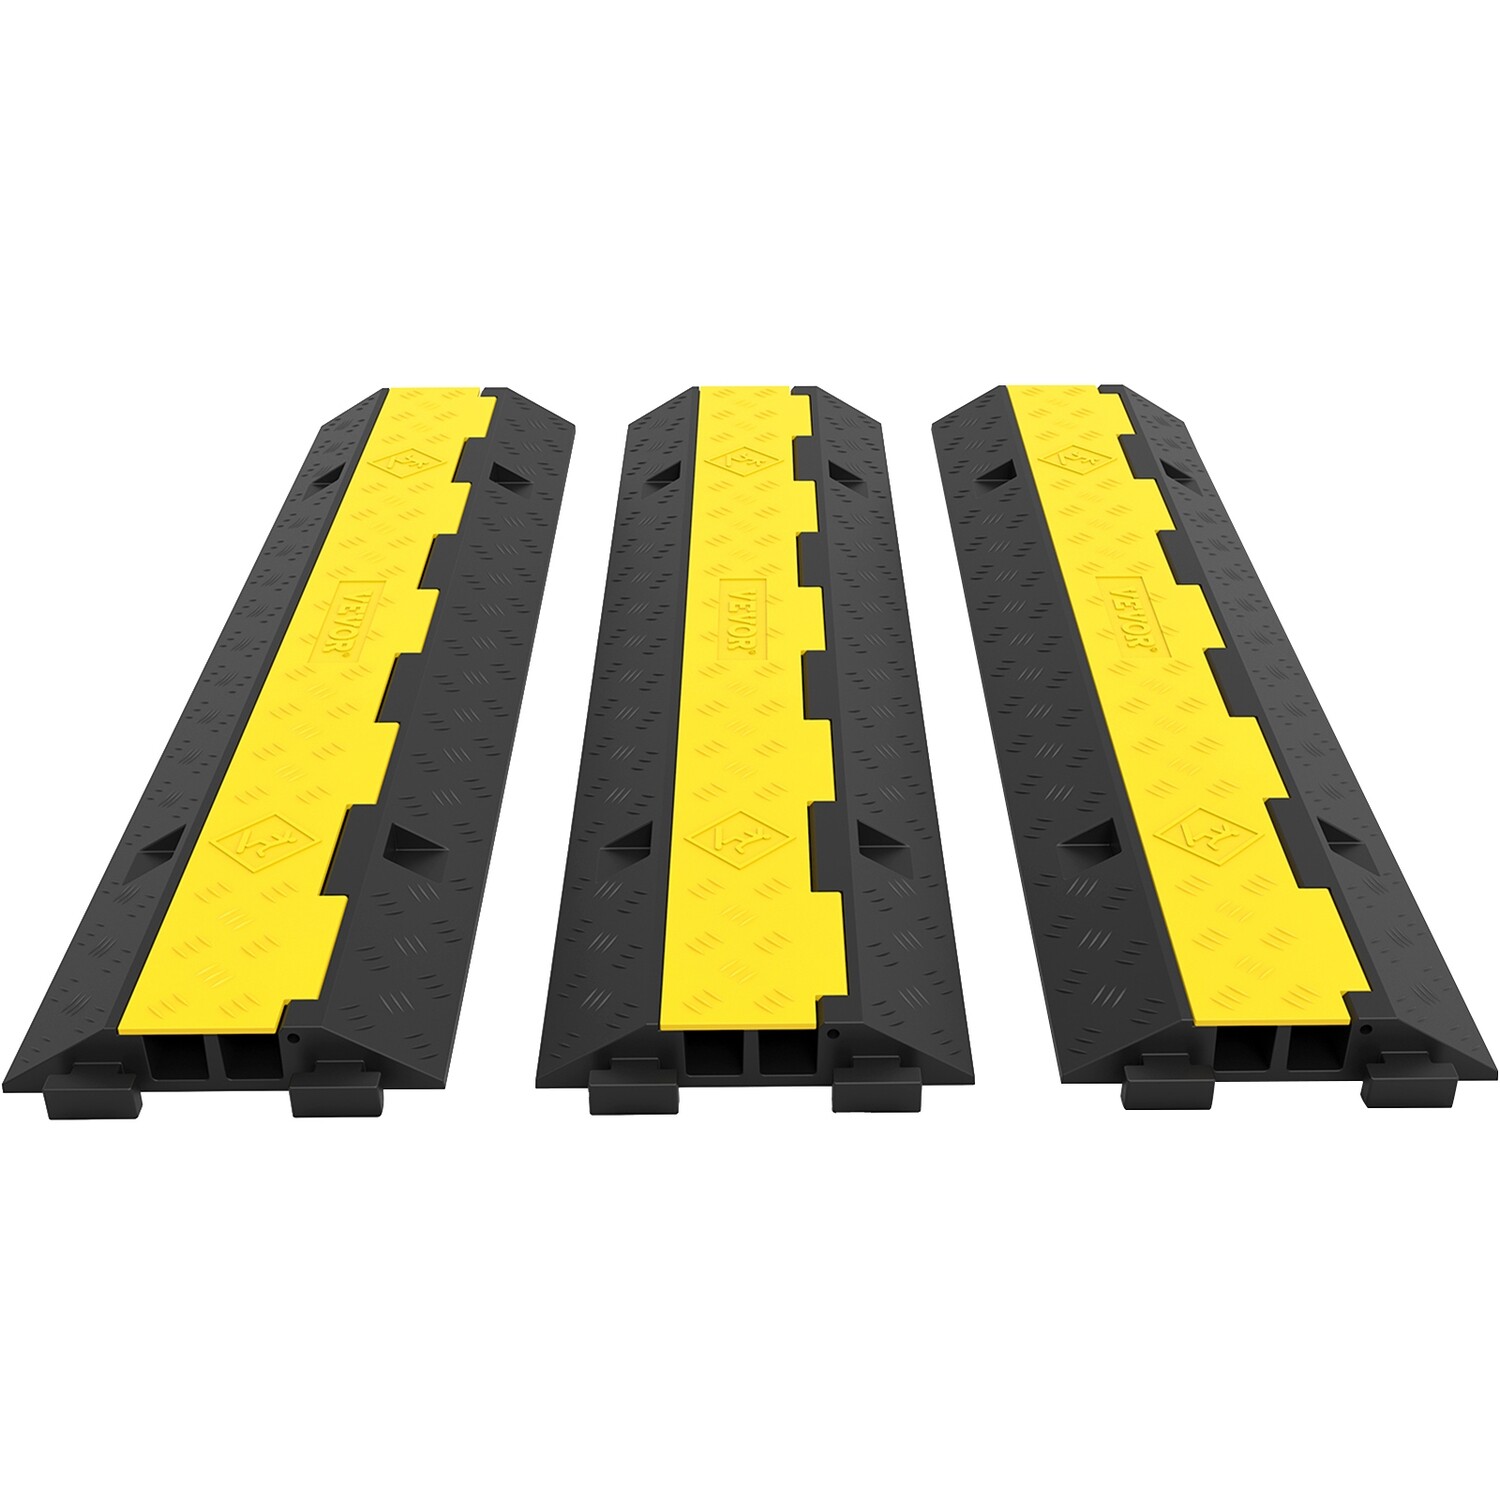 3 Pack of 2 Protective Wire Cord Ramp Driveway Rubber Traffic Speed Bumps Cable Protector 11000lbs per Axle Capacity